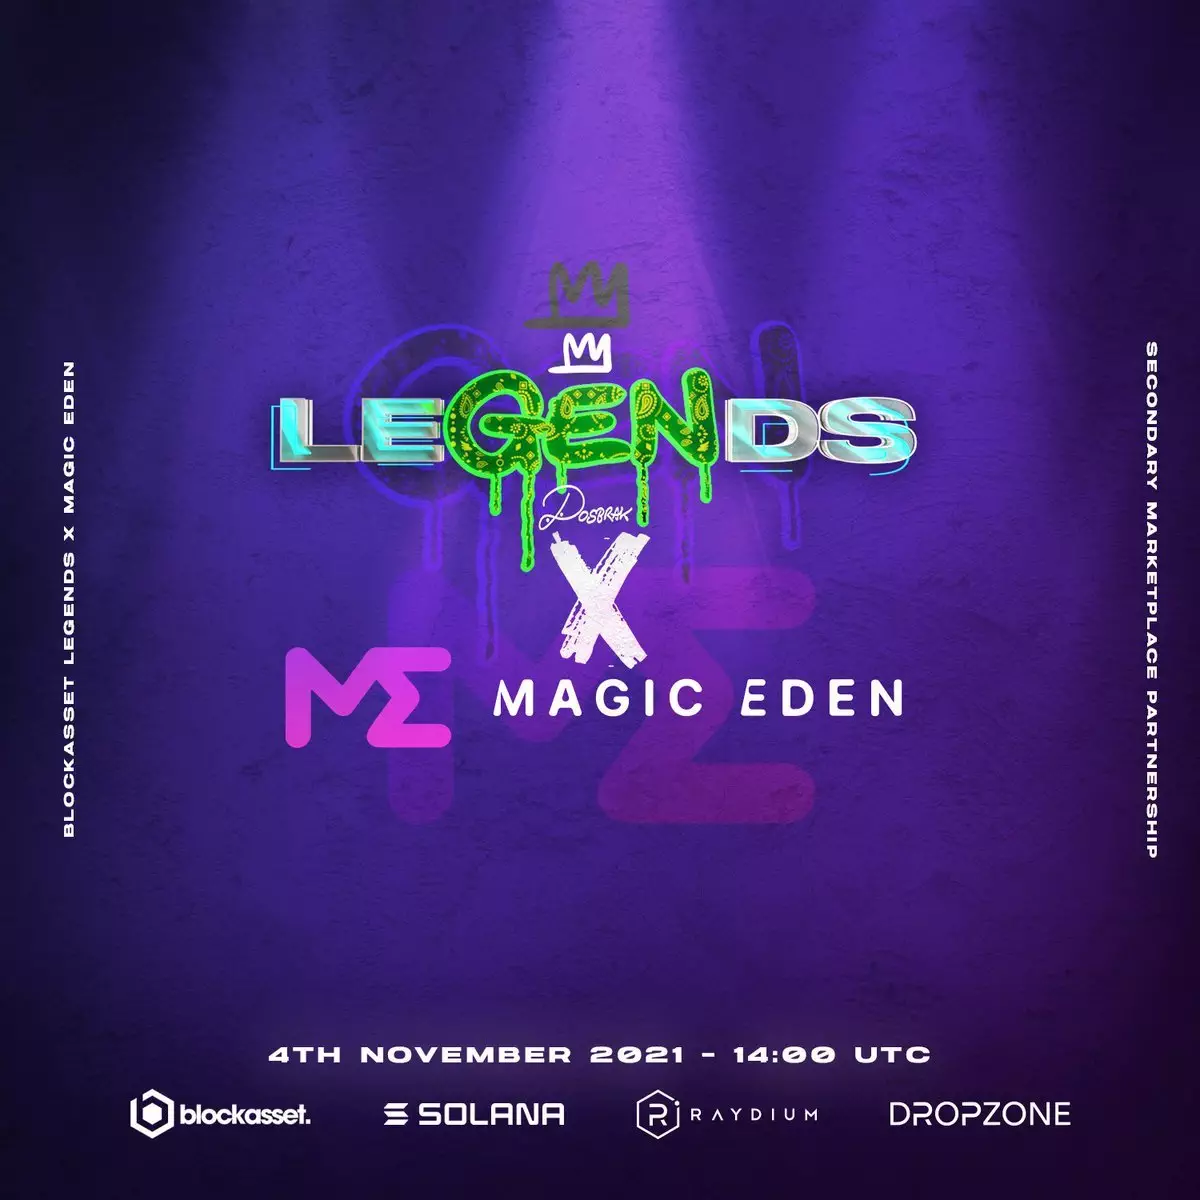 Image displaying advert for Blockasset LeGENds NFT drop. It has a purple background and also has Magio Eden written below.